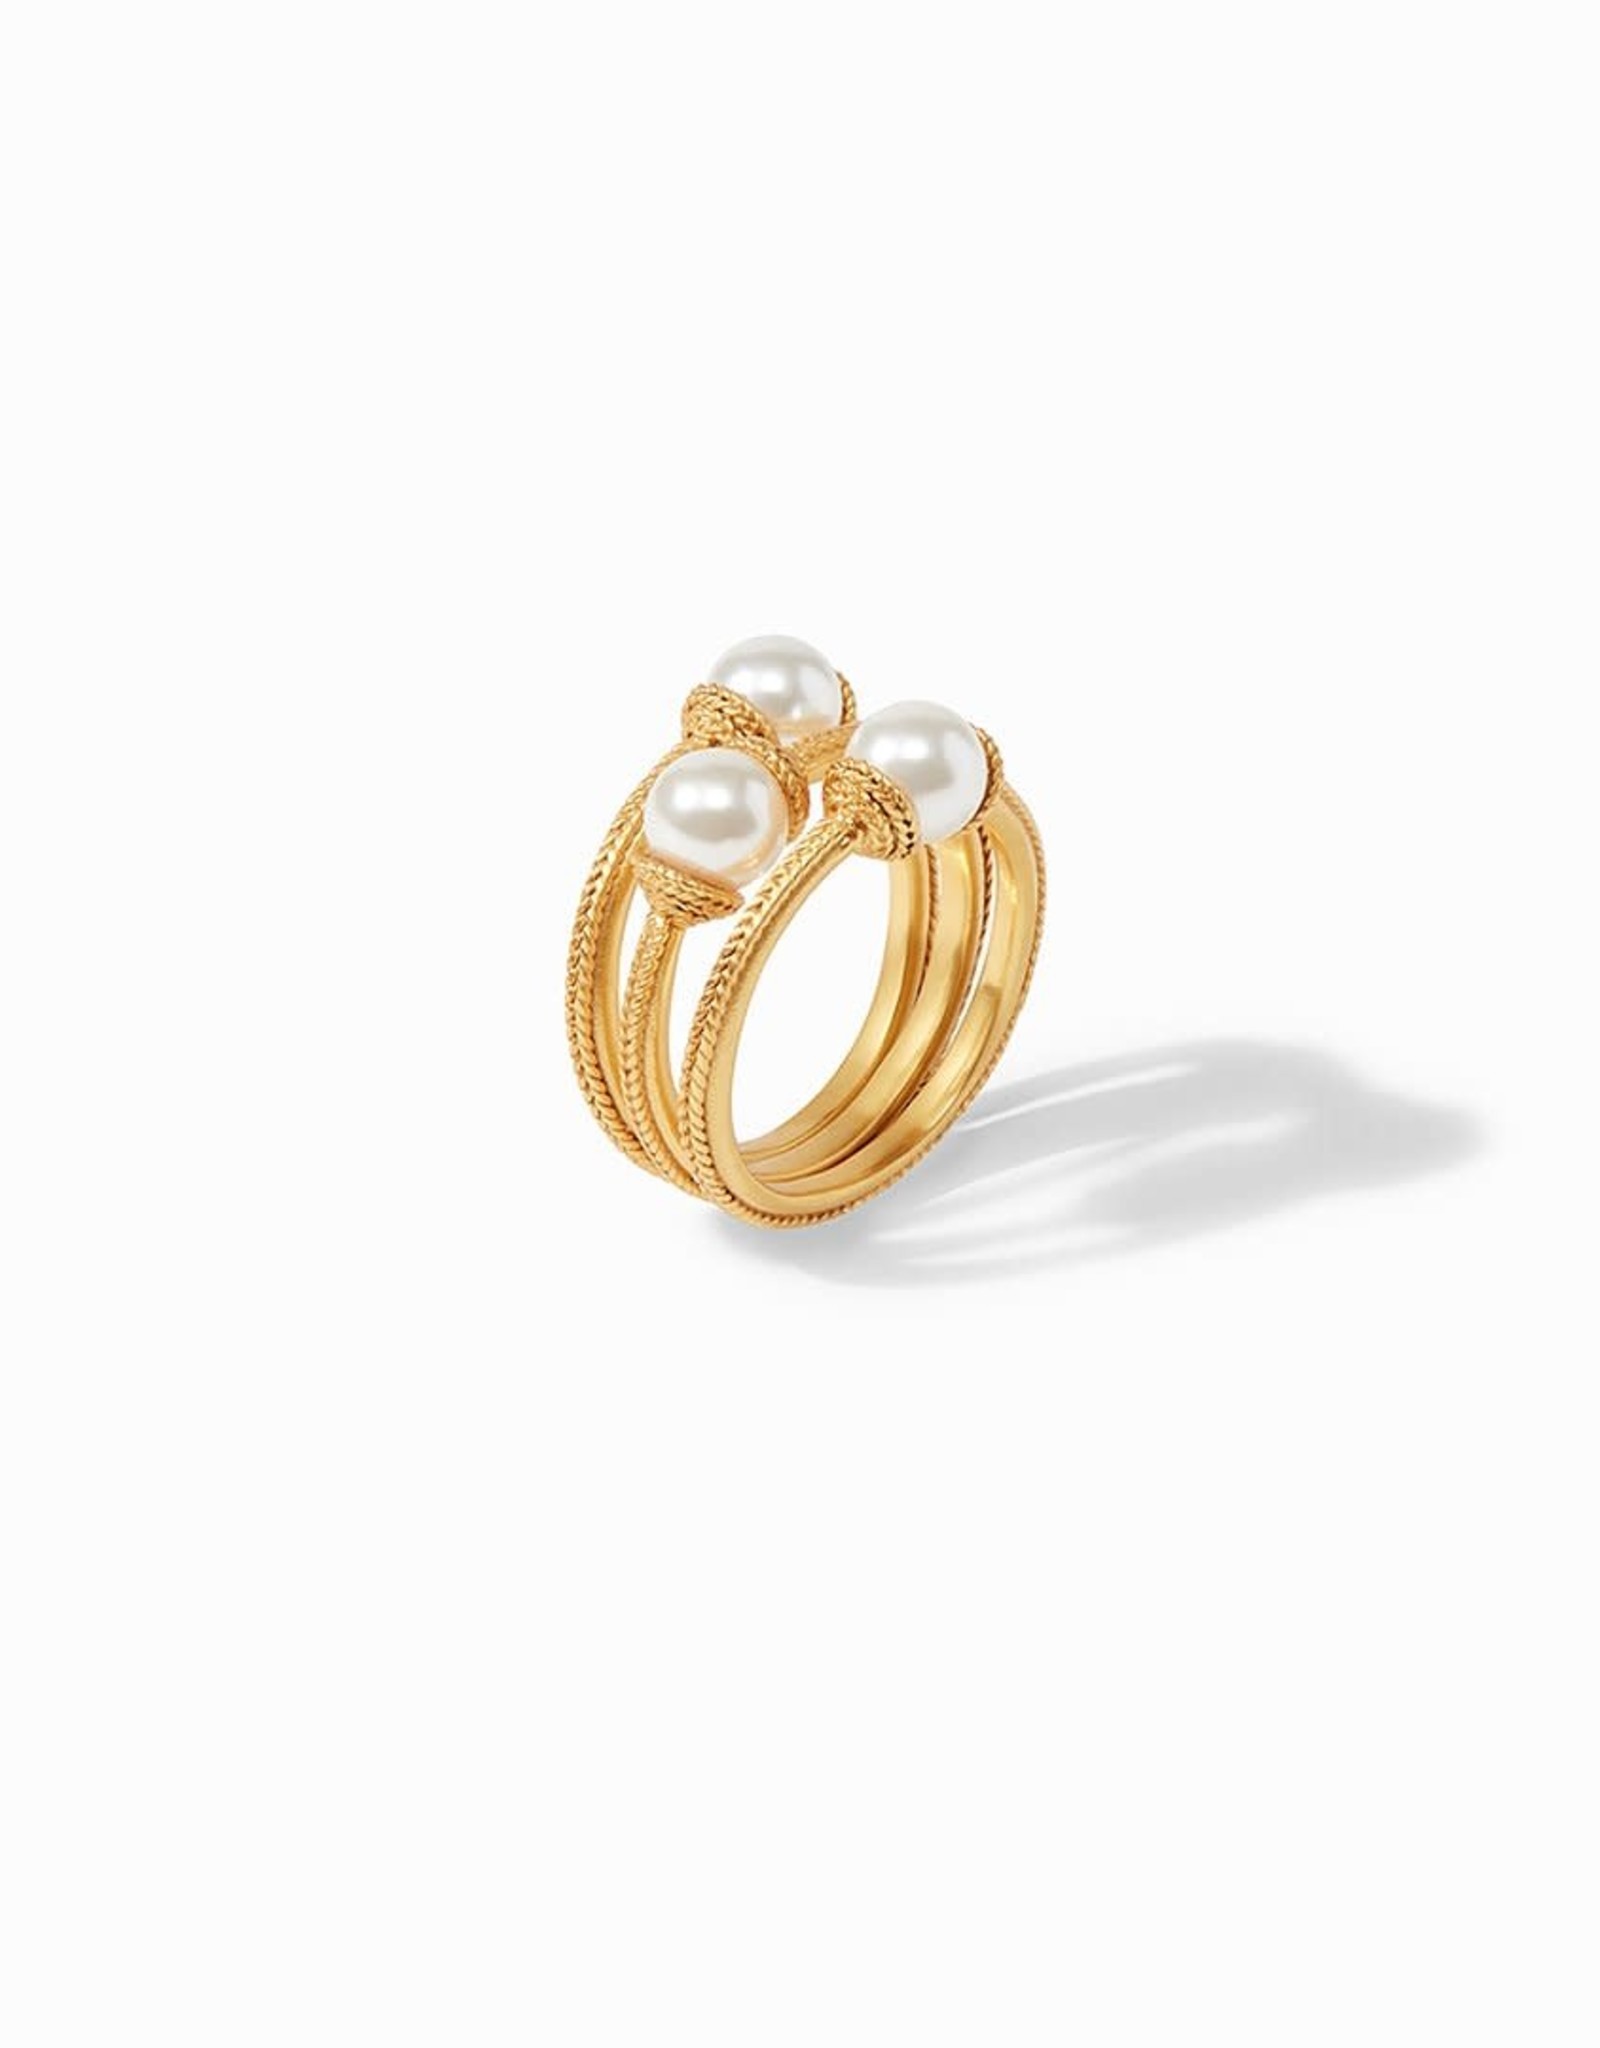 Julie Vos Calypso Pearl Stacking Ring (Set of 3) Gold - Size 7